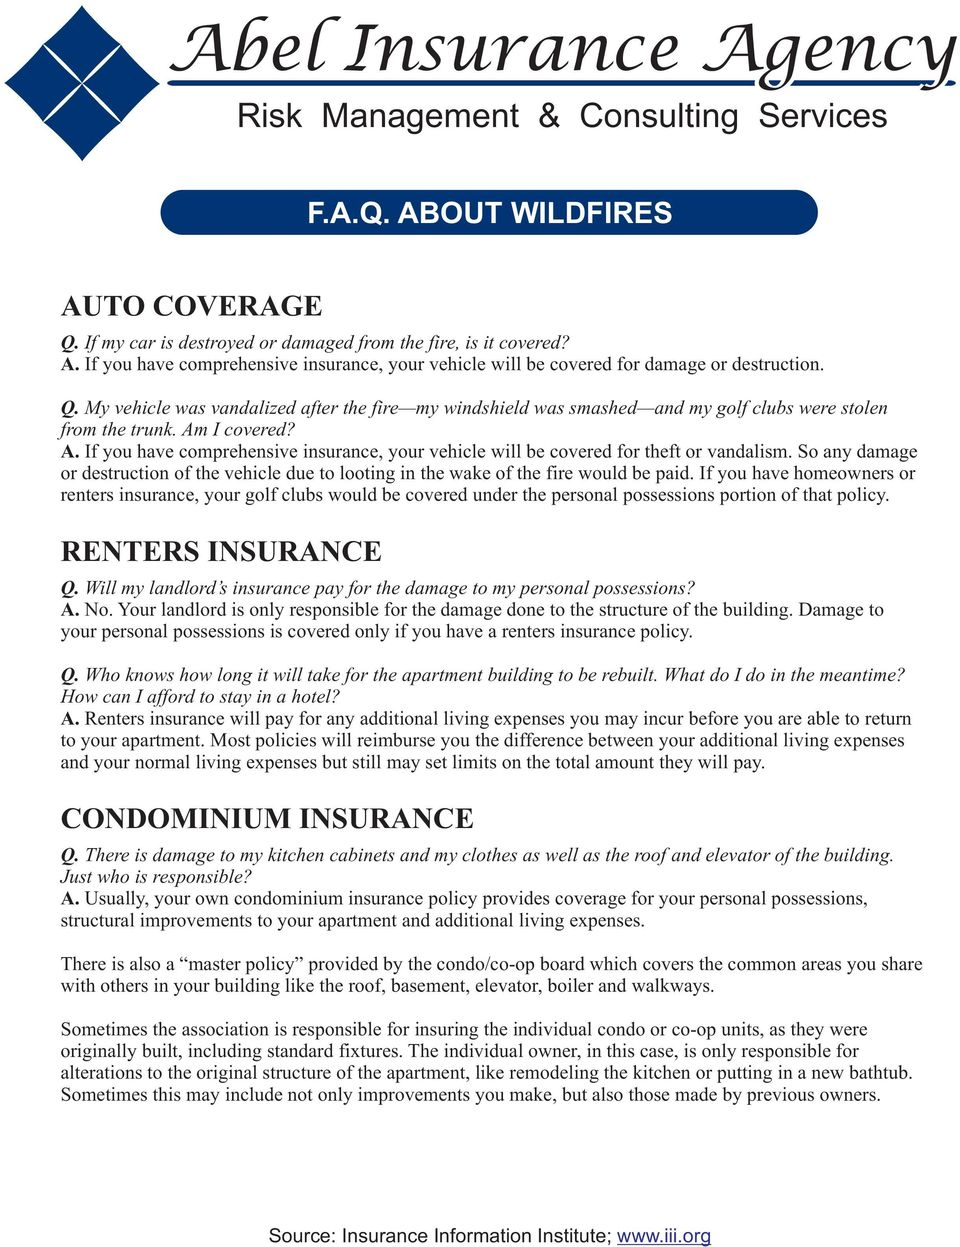 Abel Insurance Agency Pdf Free Download with dimensions 960 X 1247